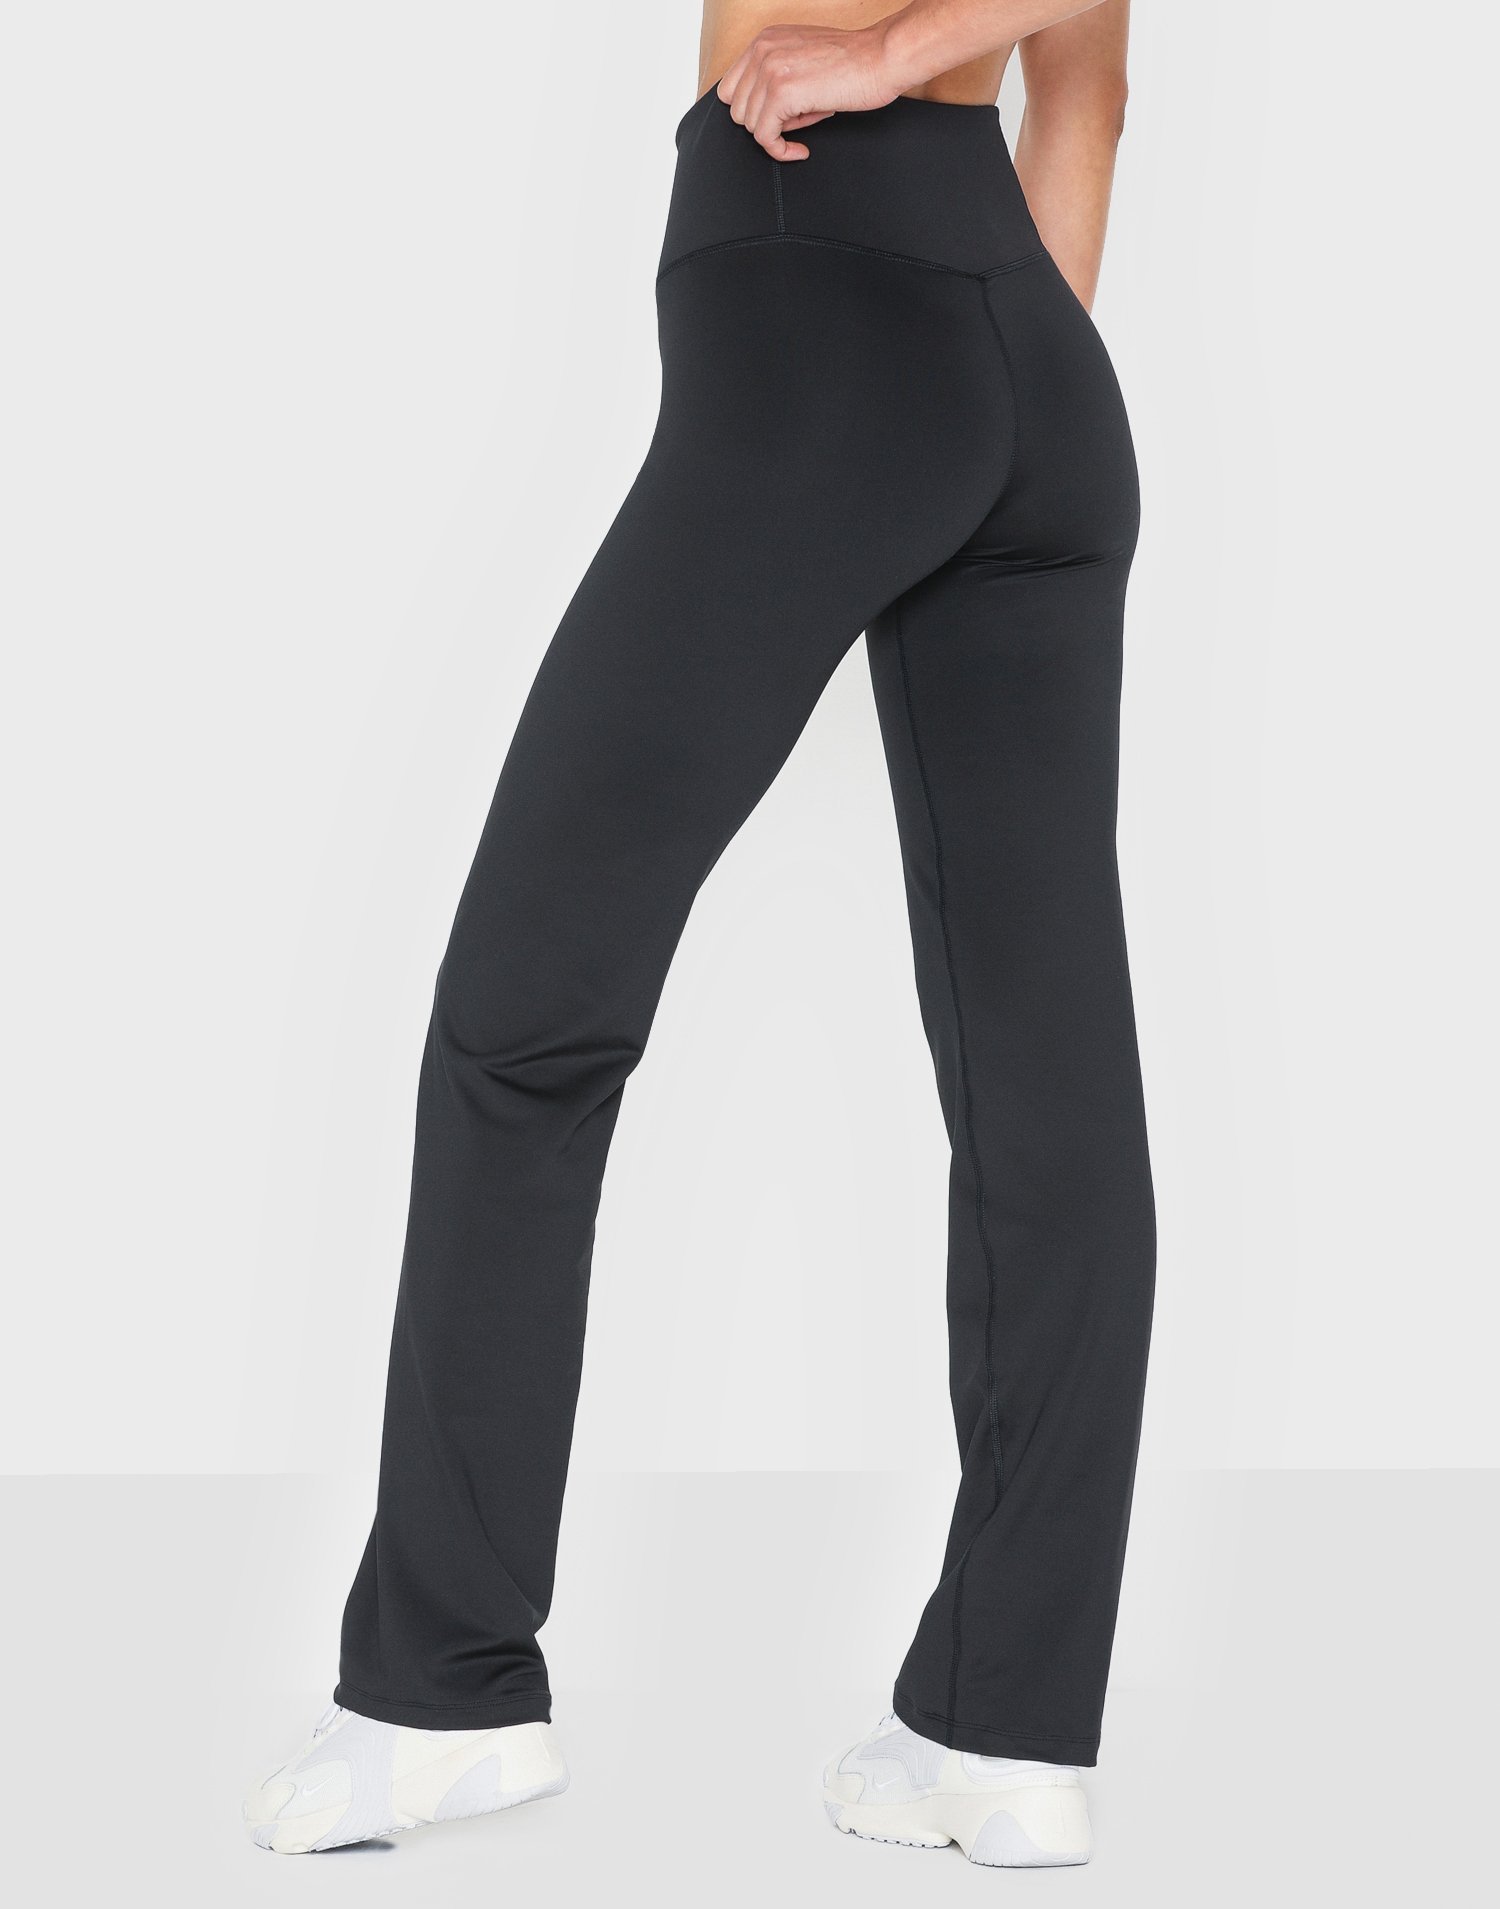 W NK PWR CLASSIC PANT - Black - Nelly.com